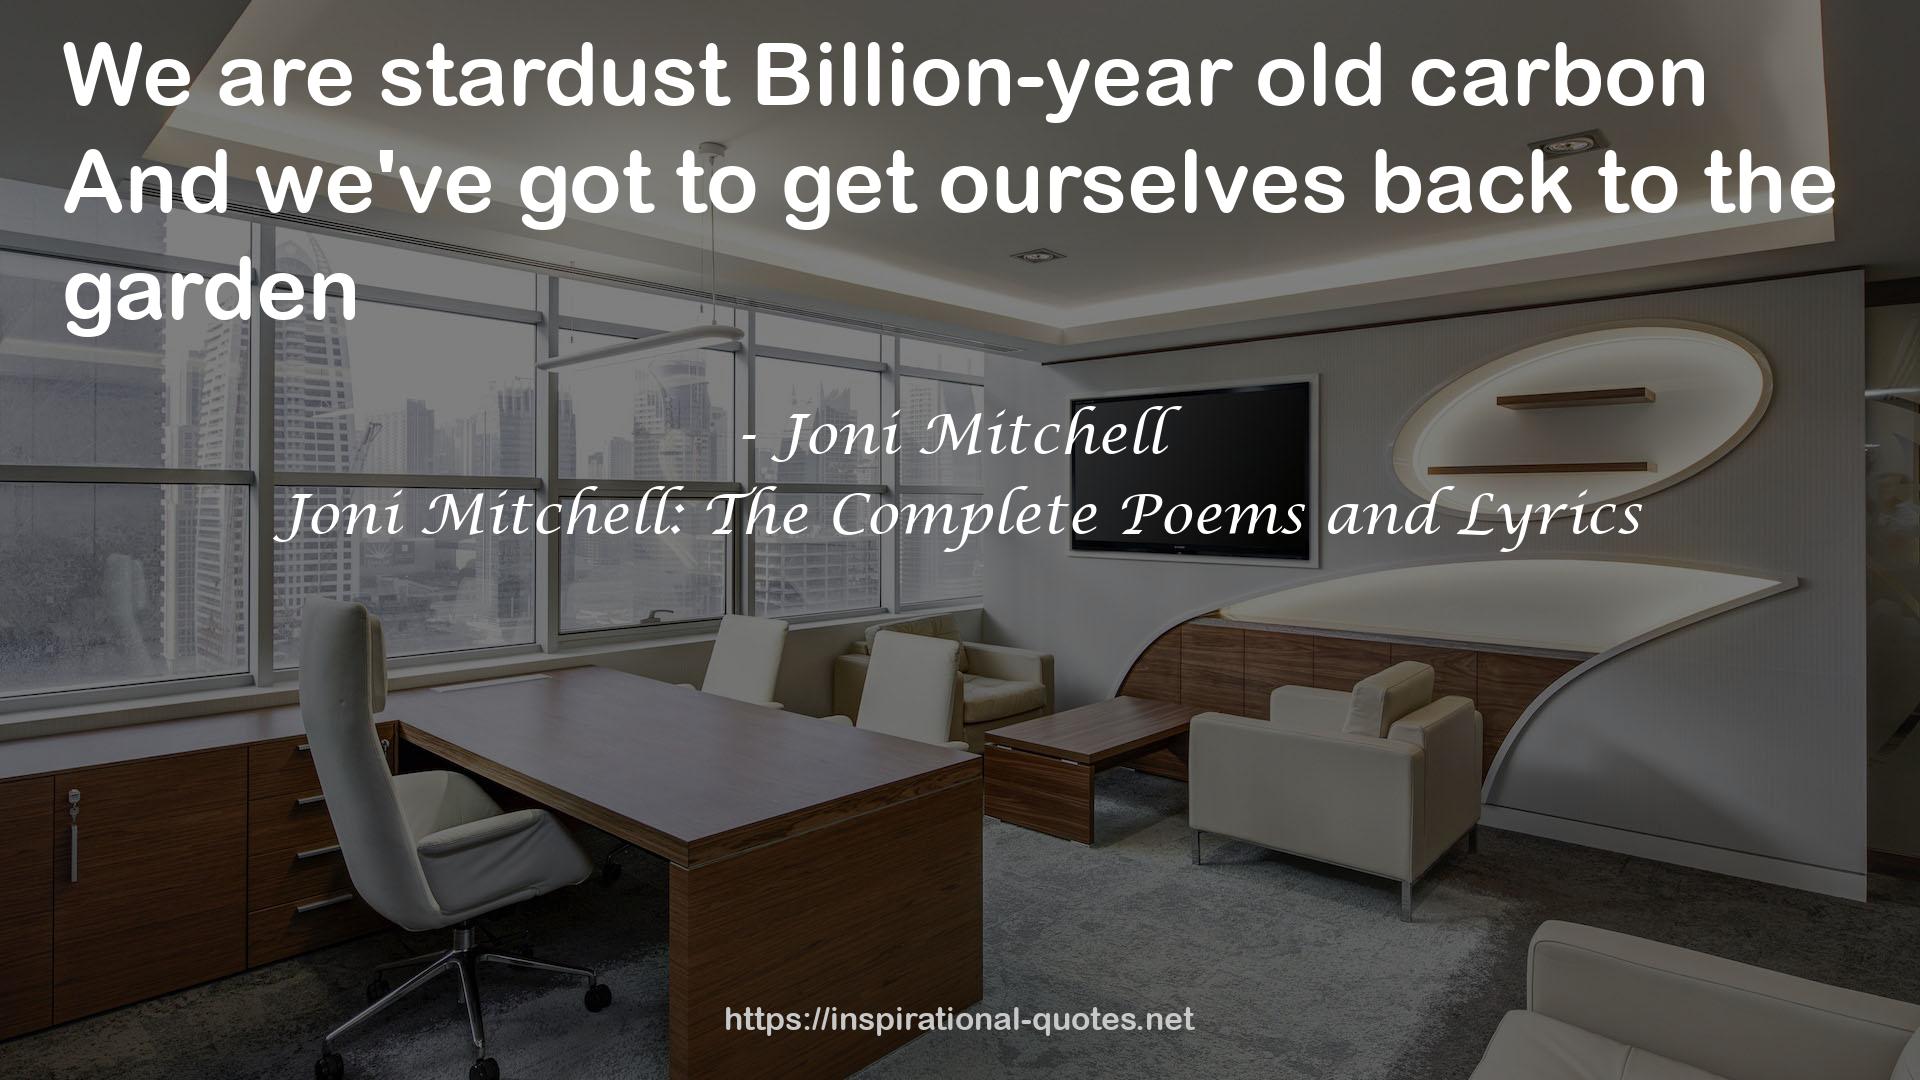 Joni Mitchell: The Complete Poems and Lyrics QUOTES